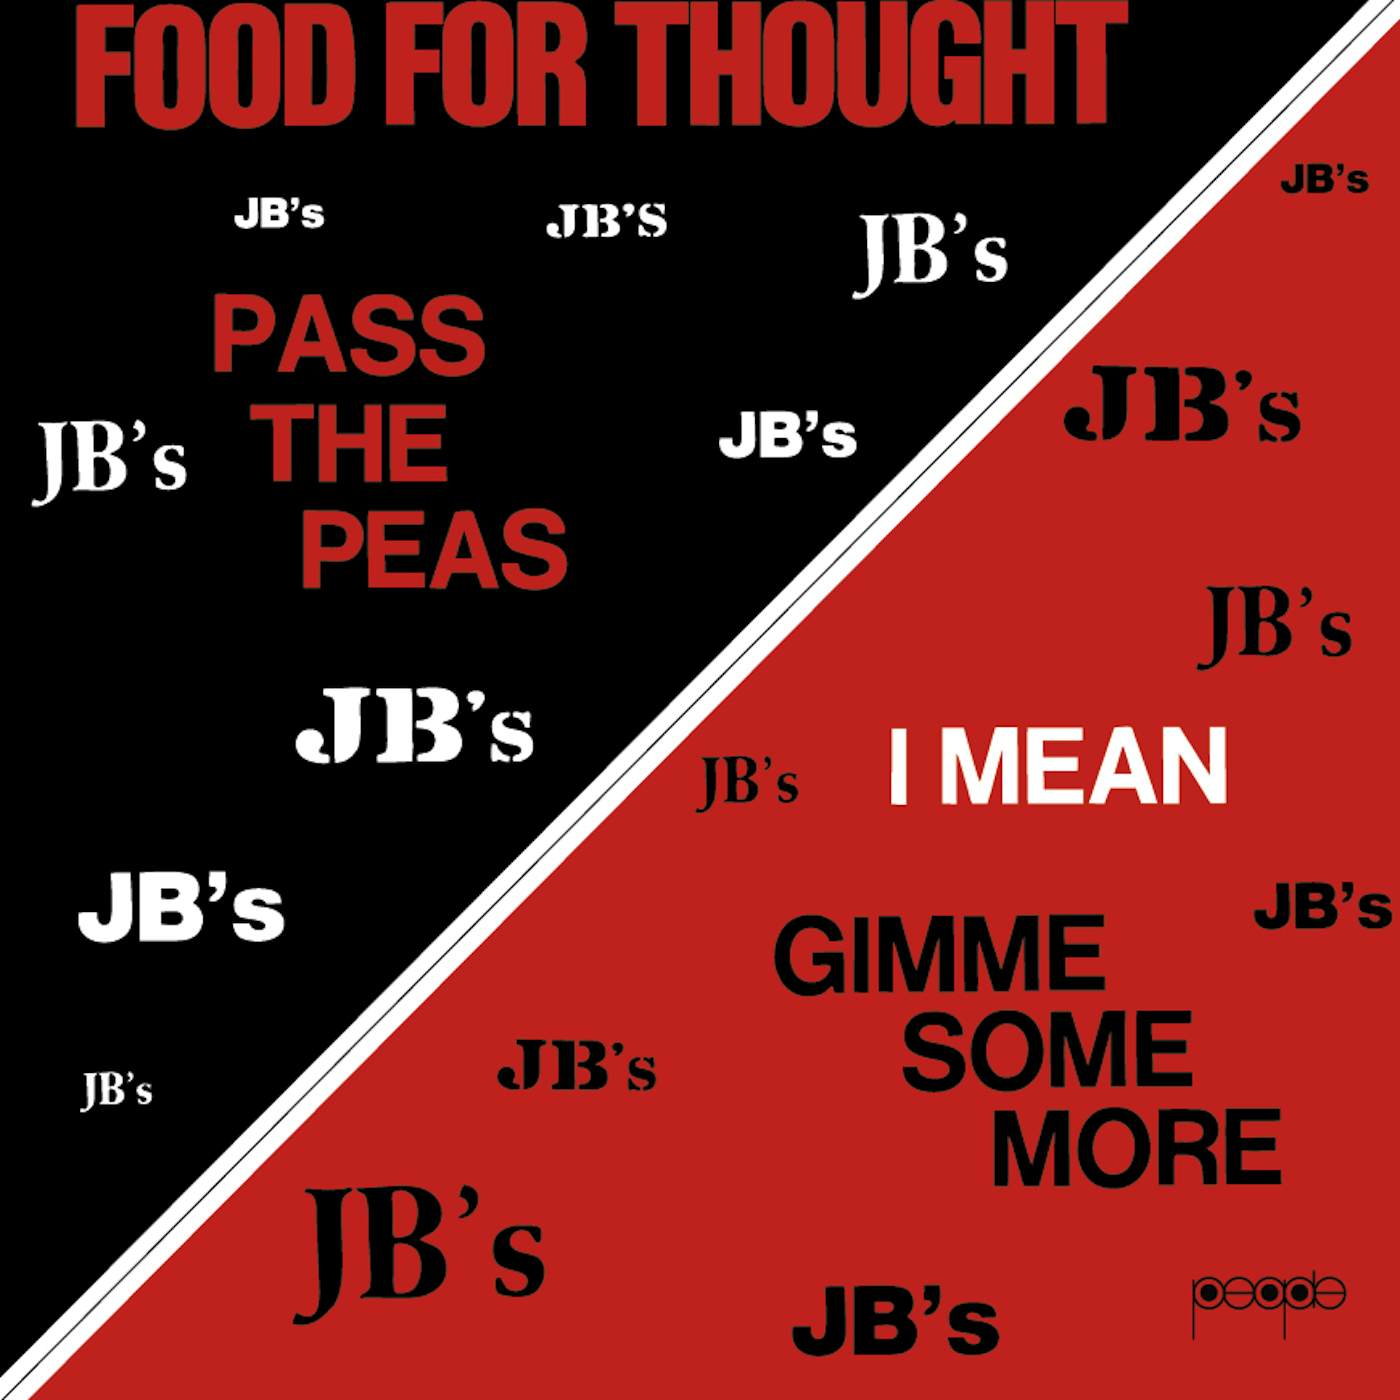 The J.B.'s Food For Thought Vinyl Record